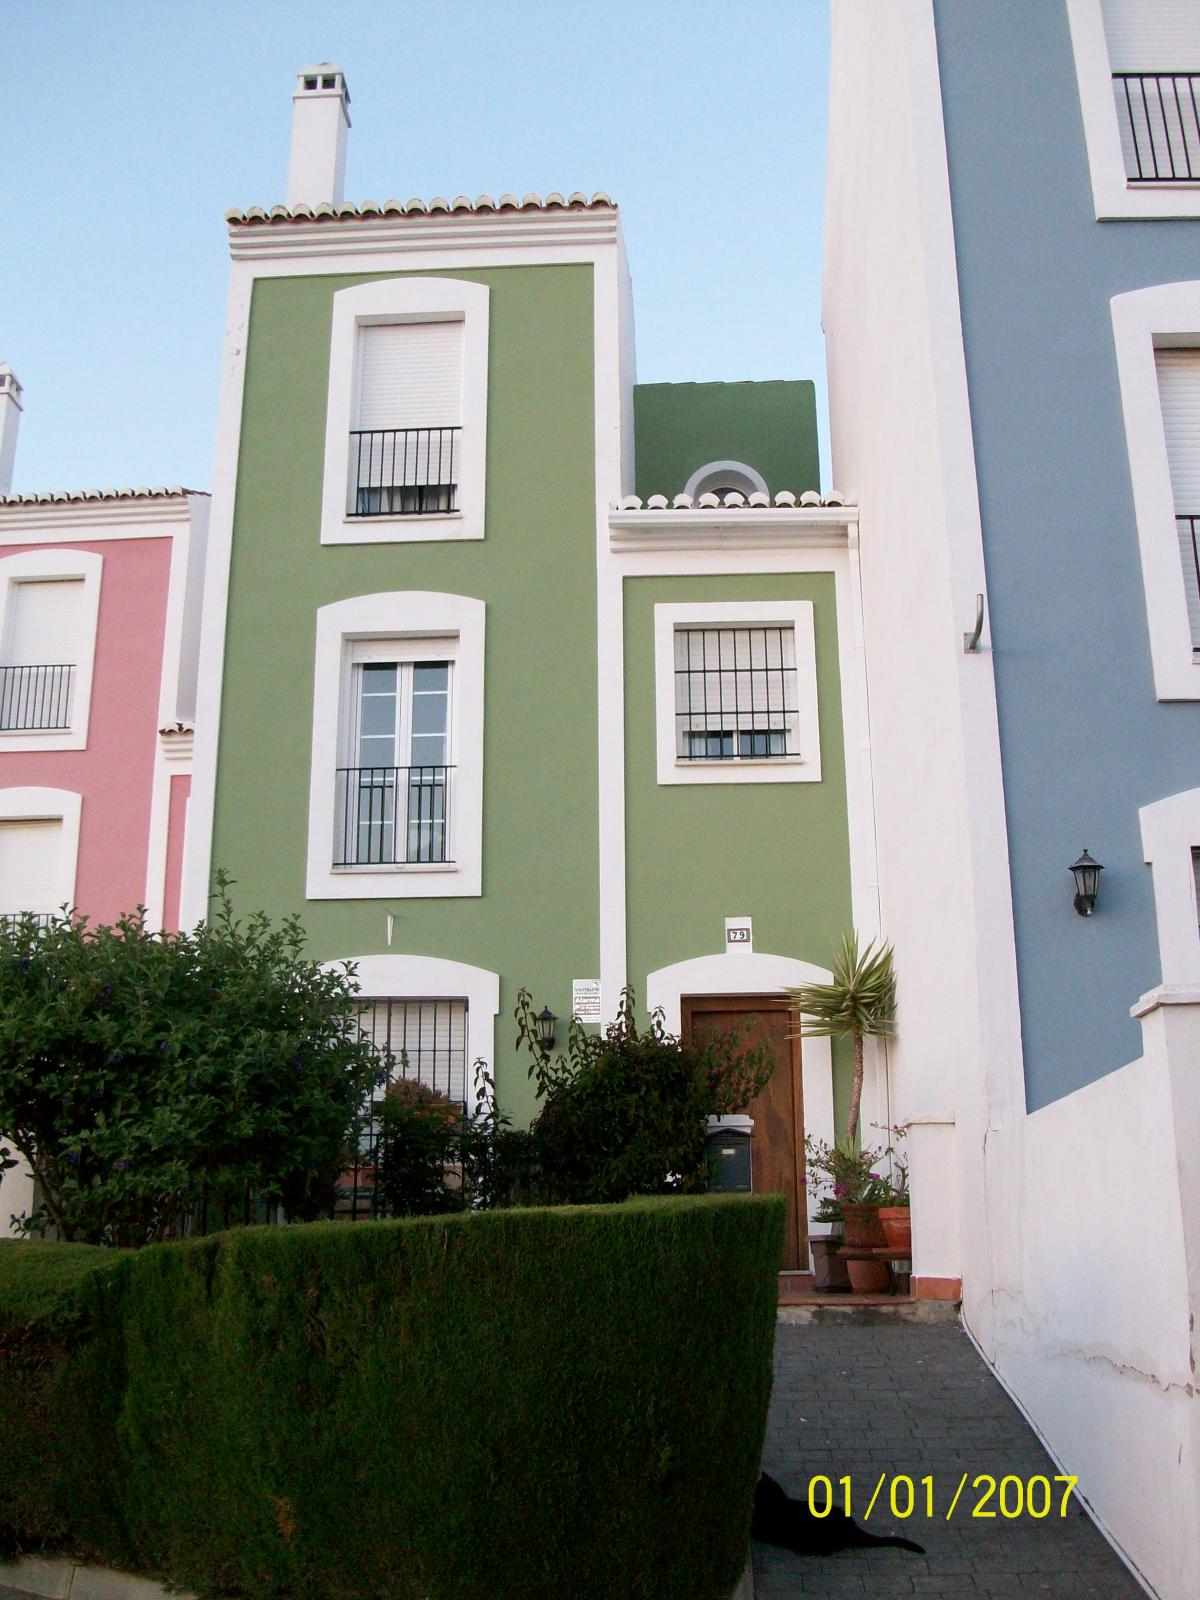 Picture of Home For Sale in Casares, Malaga, Spain